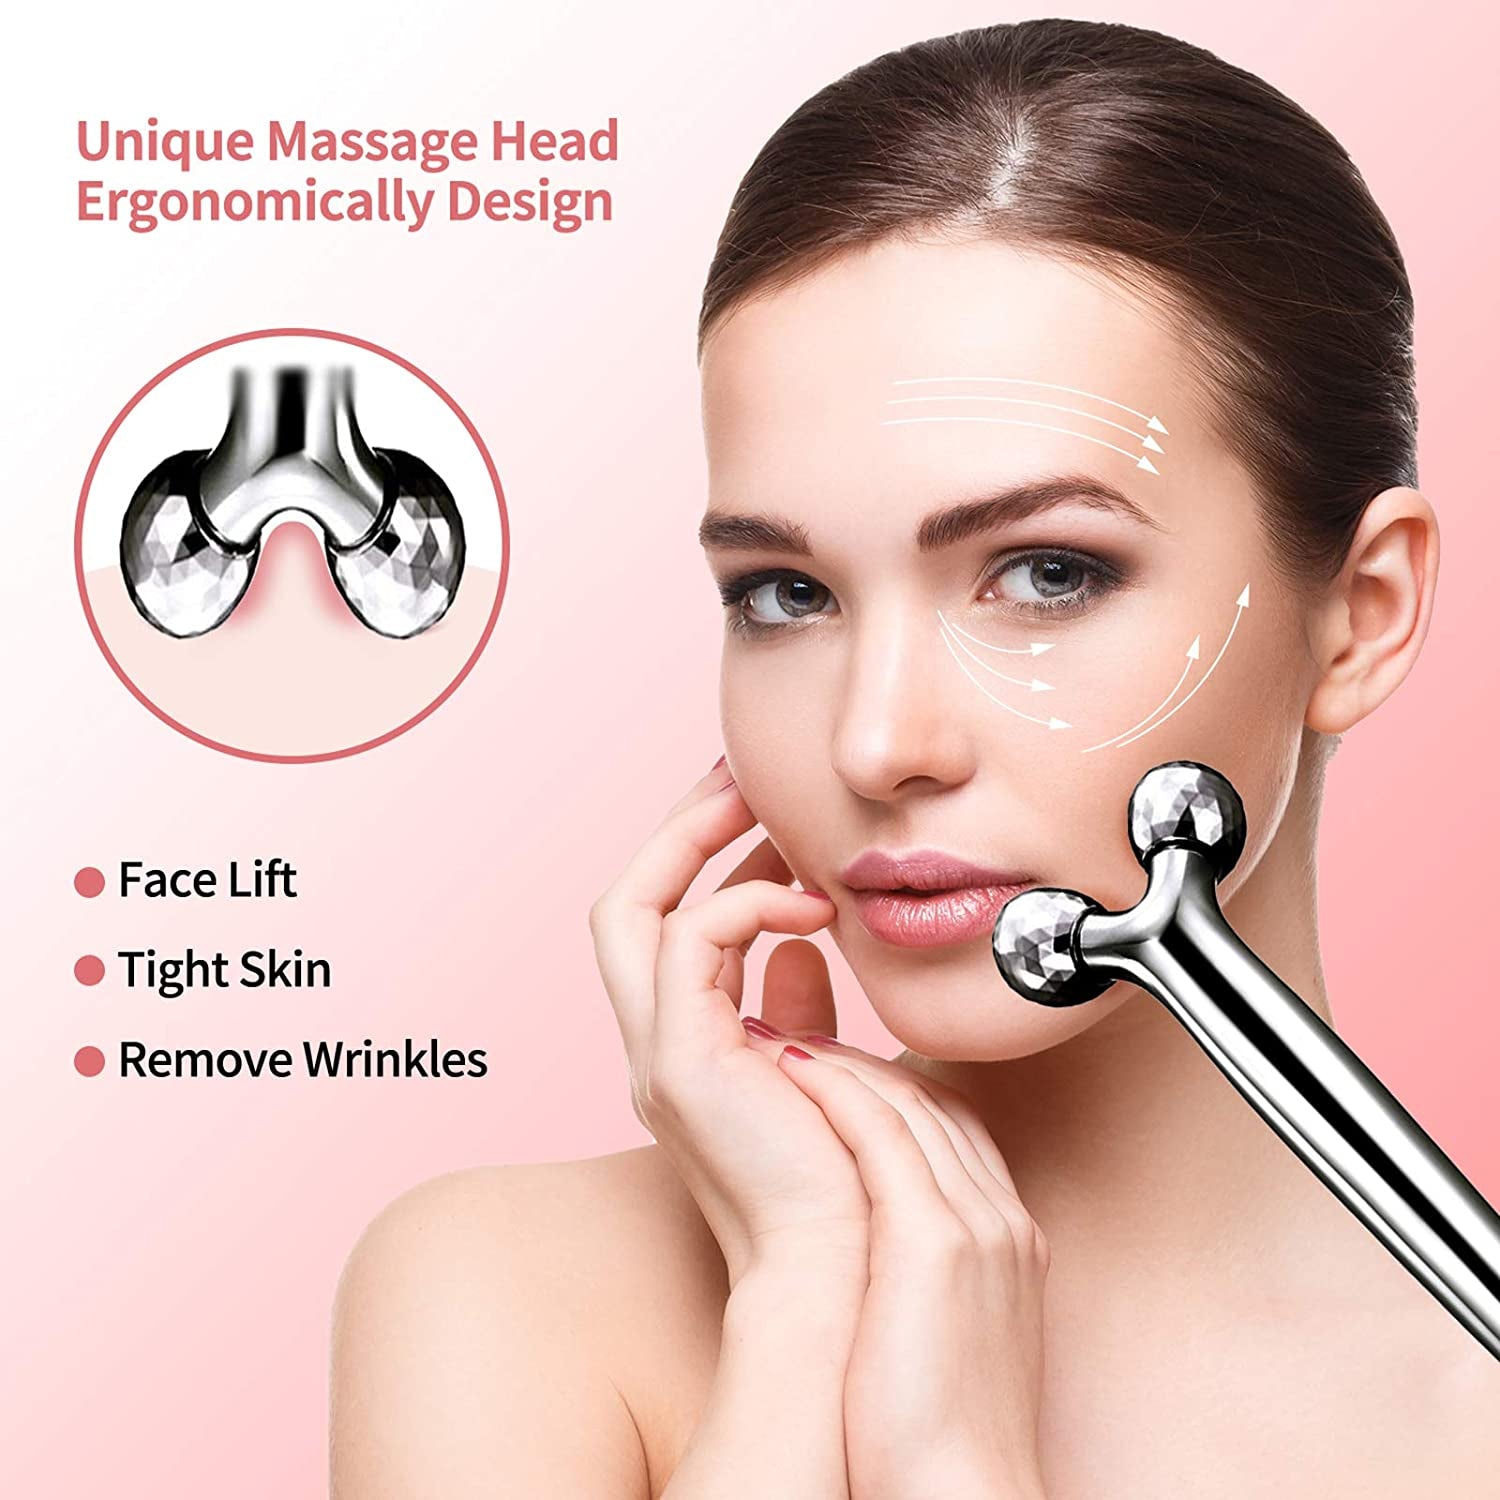  Face Roller Massager - Enhances Skin Tone and Promotes a Youthful Appearance